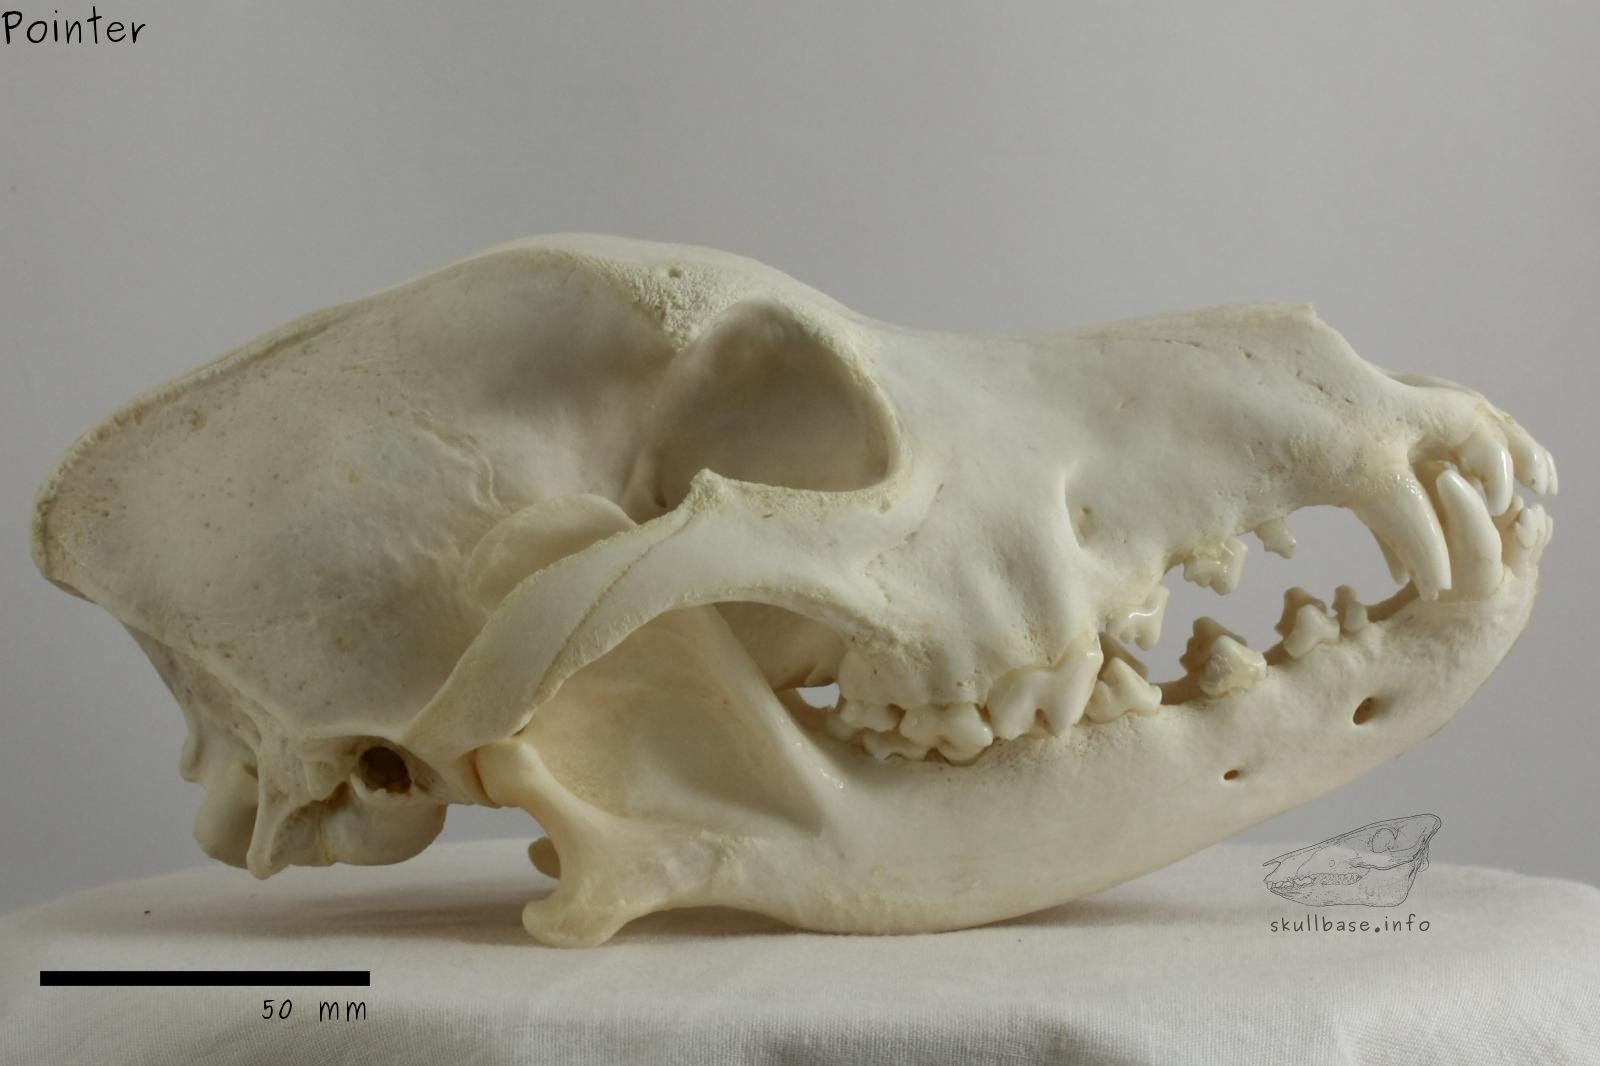 Pointer (Canis lupus familiaris) skull lateral view